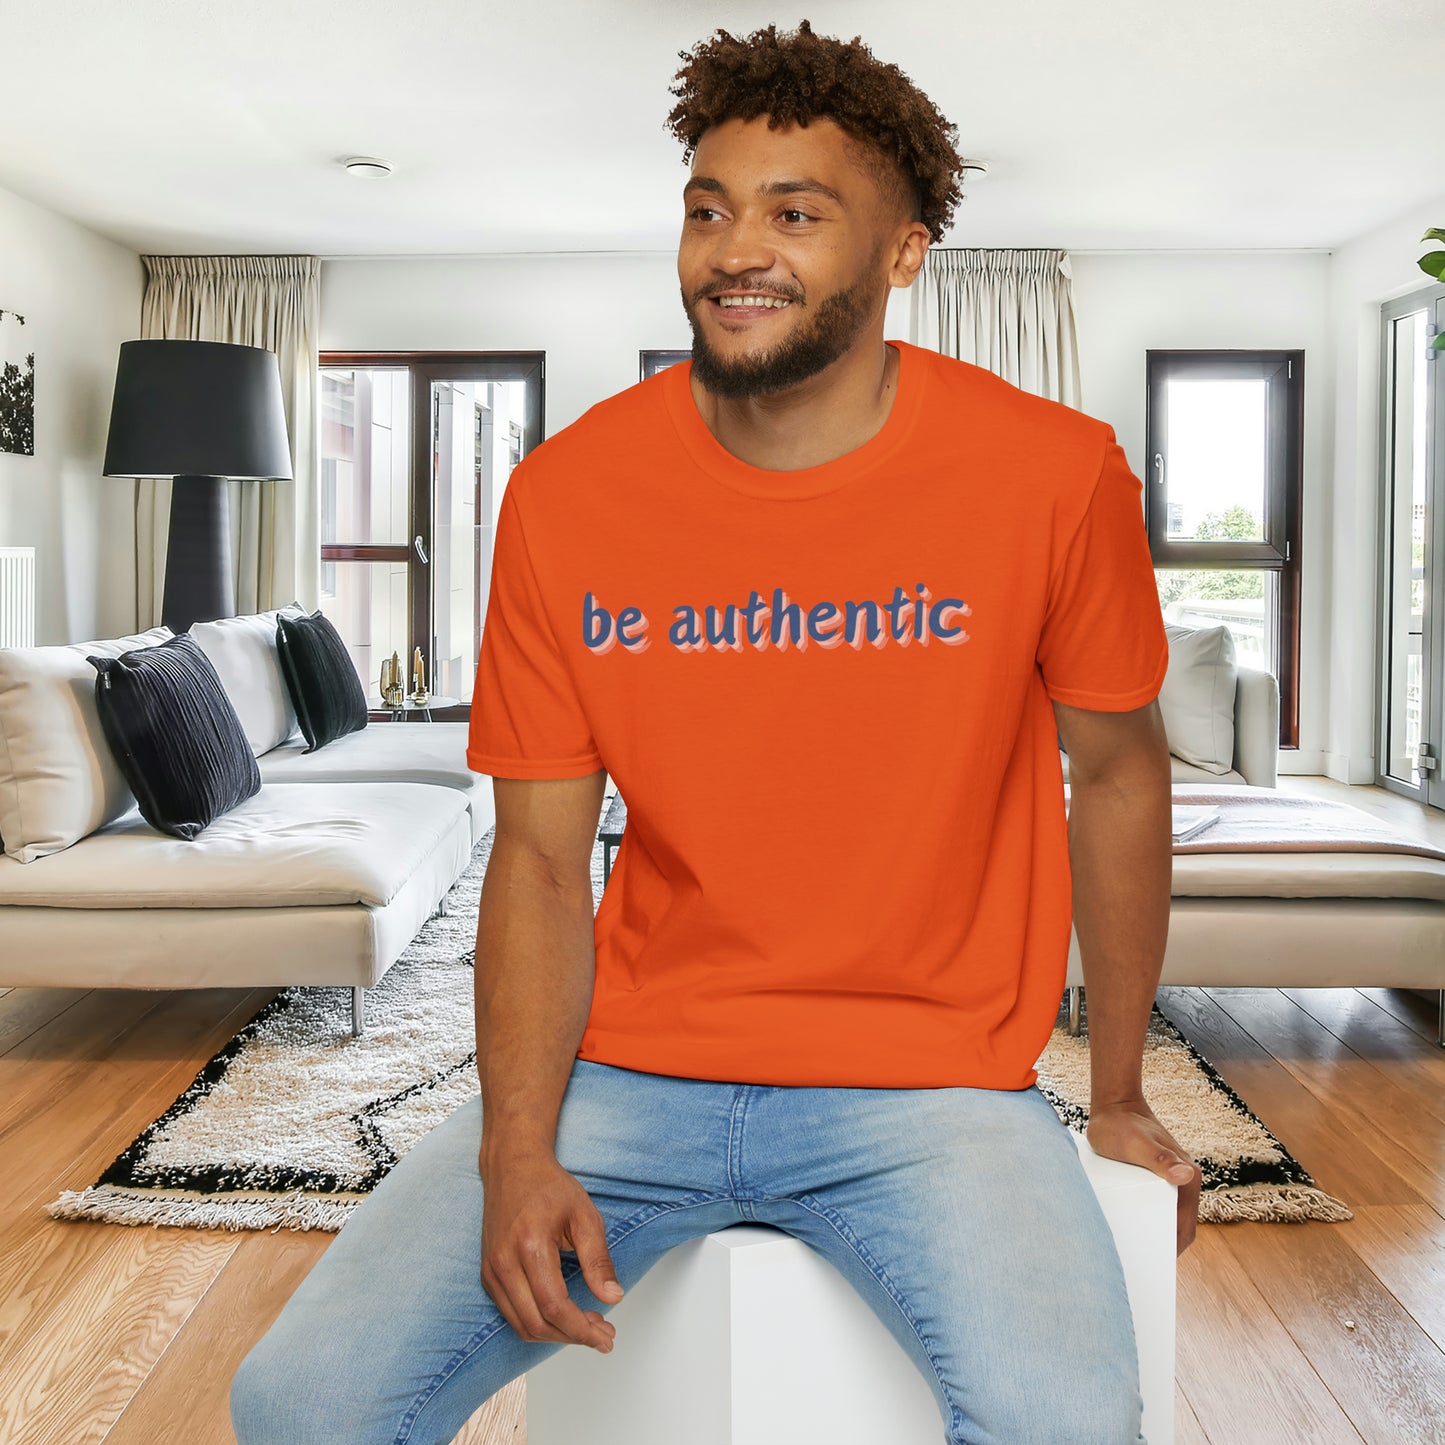 Be authentic is the message of this uniquely designed Unisex Softstyle T-Shirt for you.